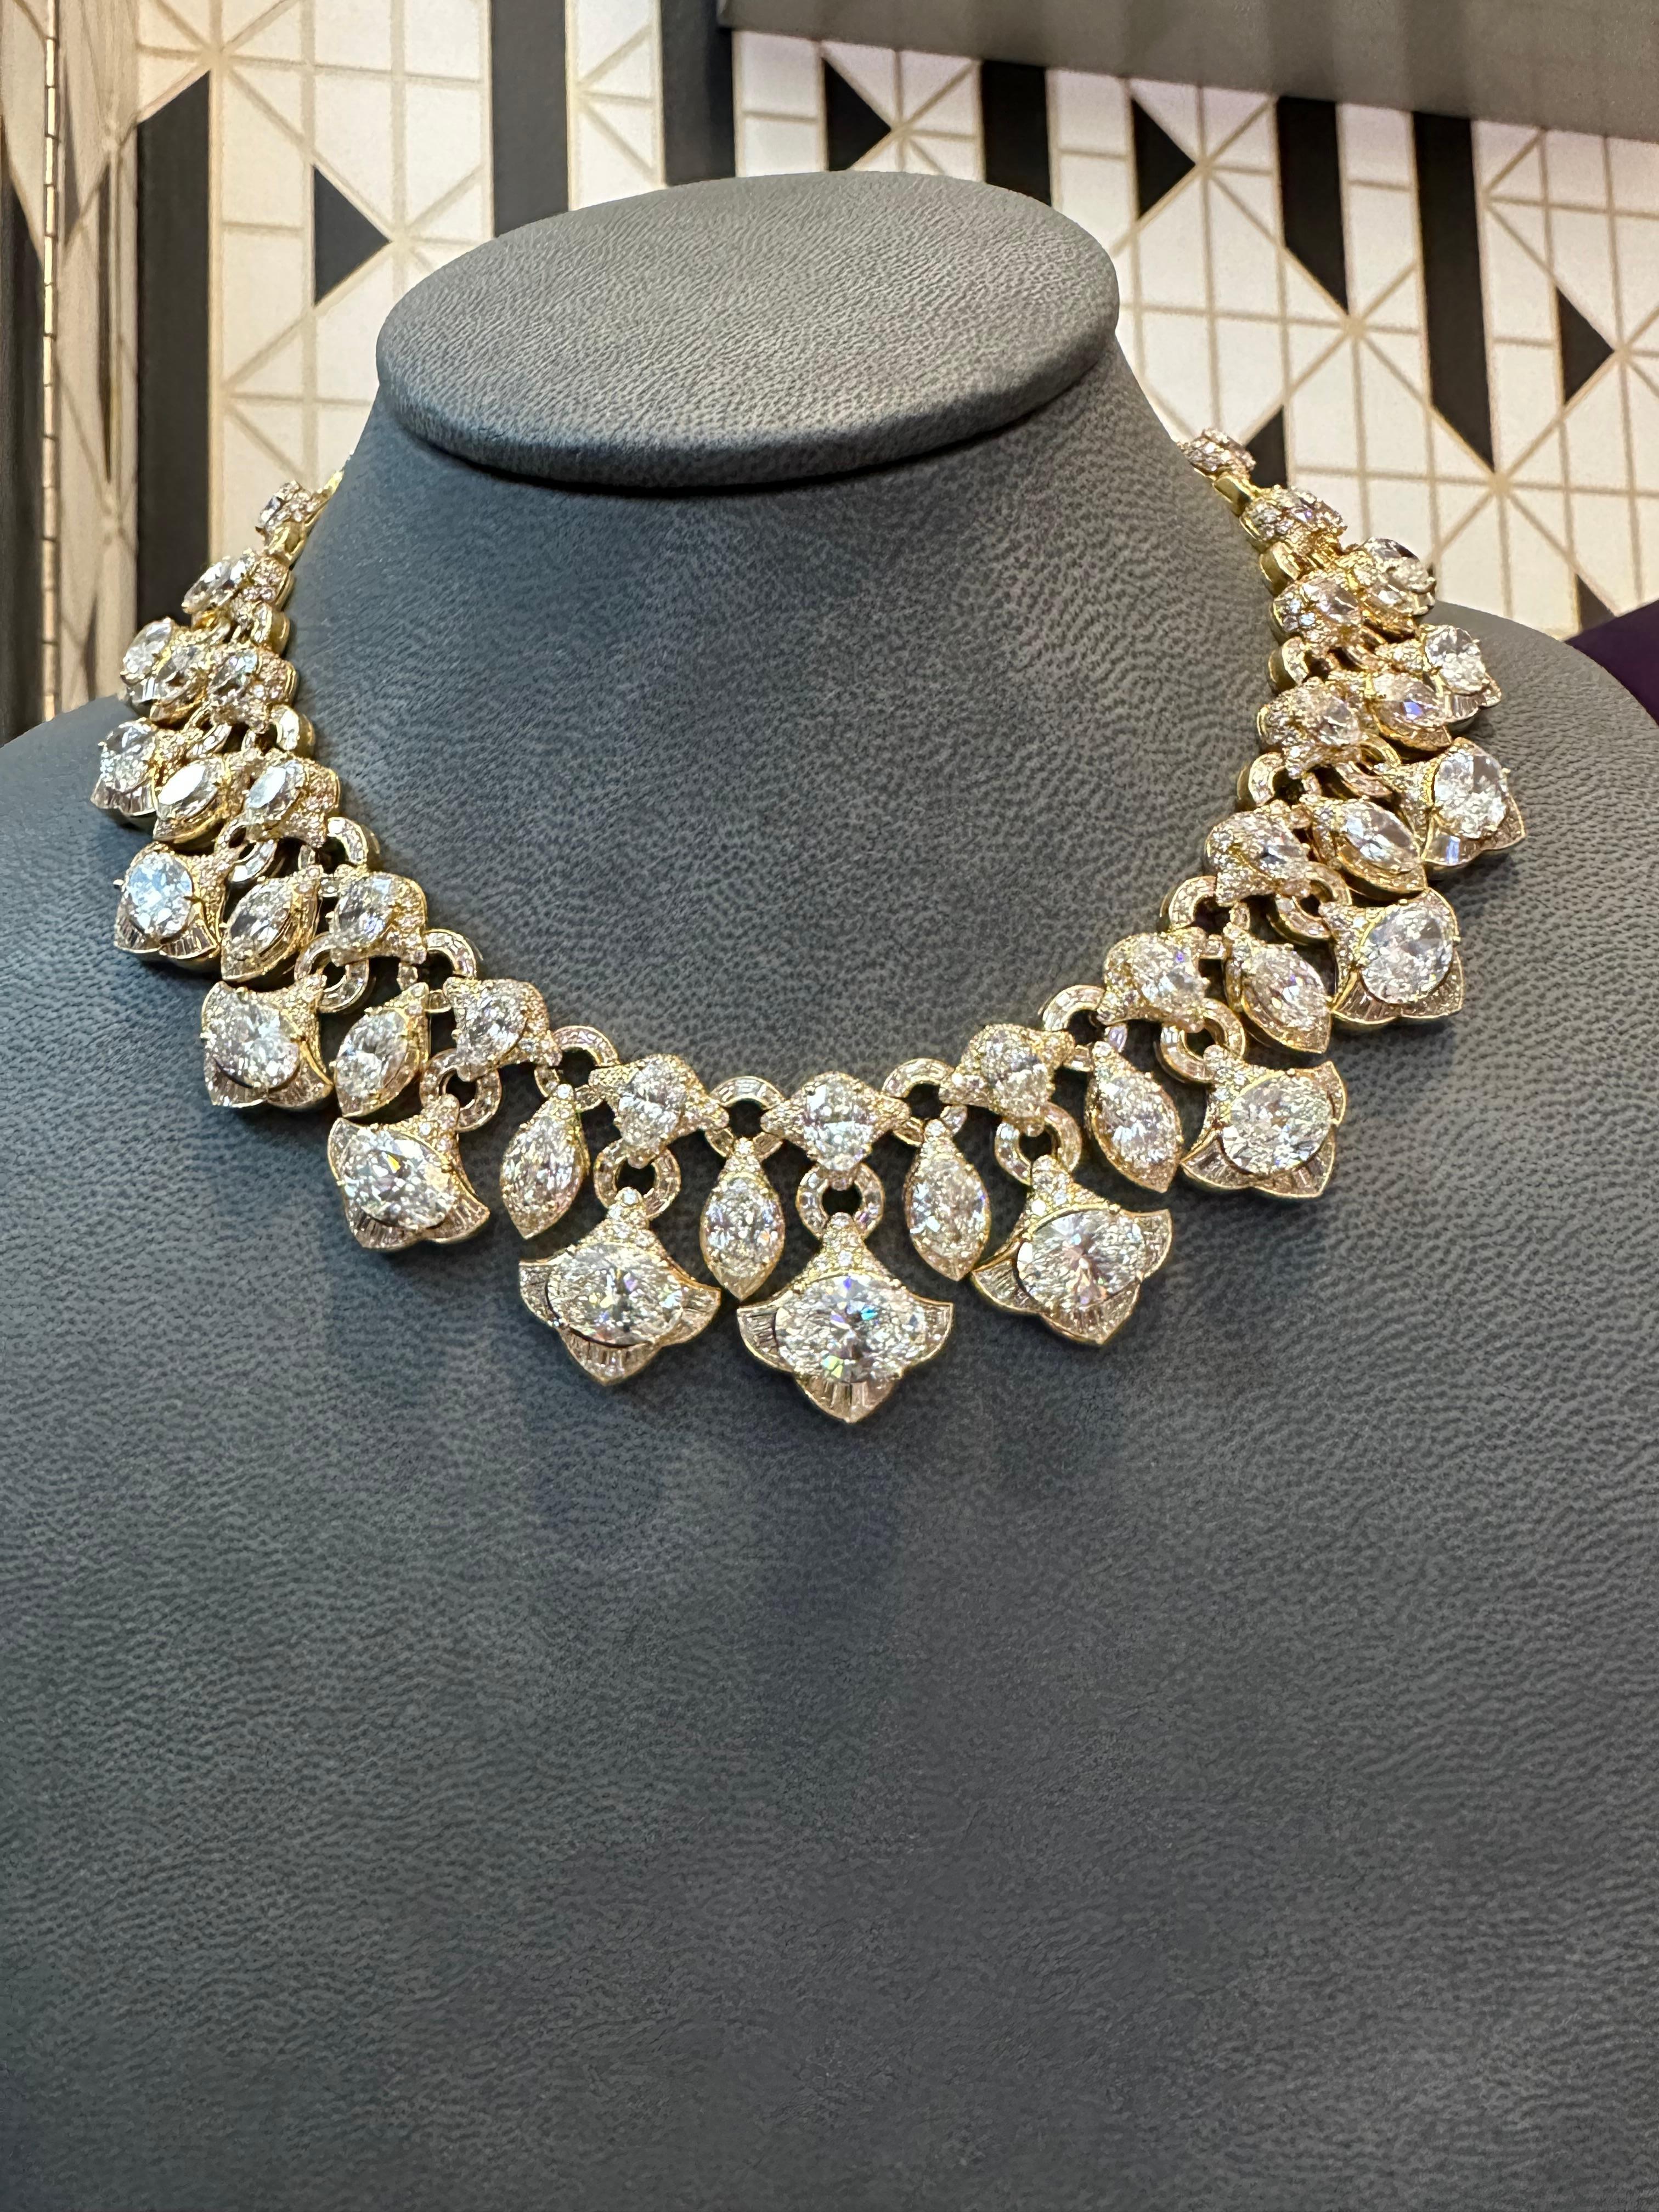 Mixed Cut Historic Bvlgari Diamond Necklace & Earrings Set  For Sale